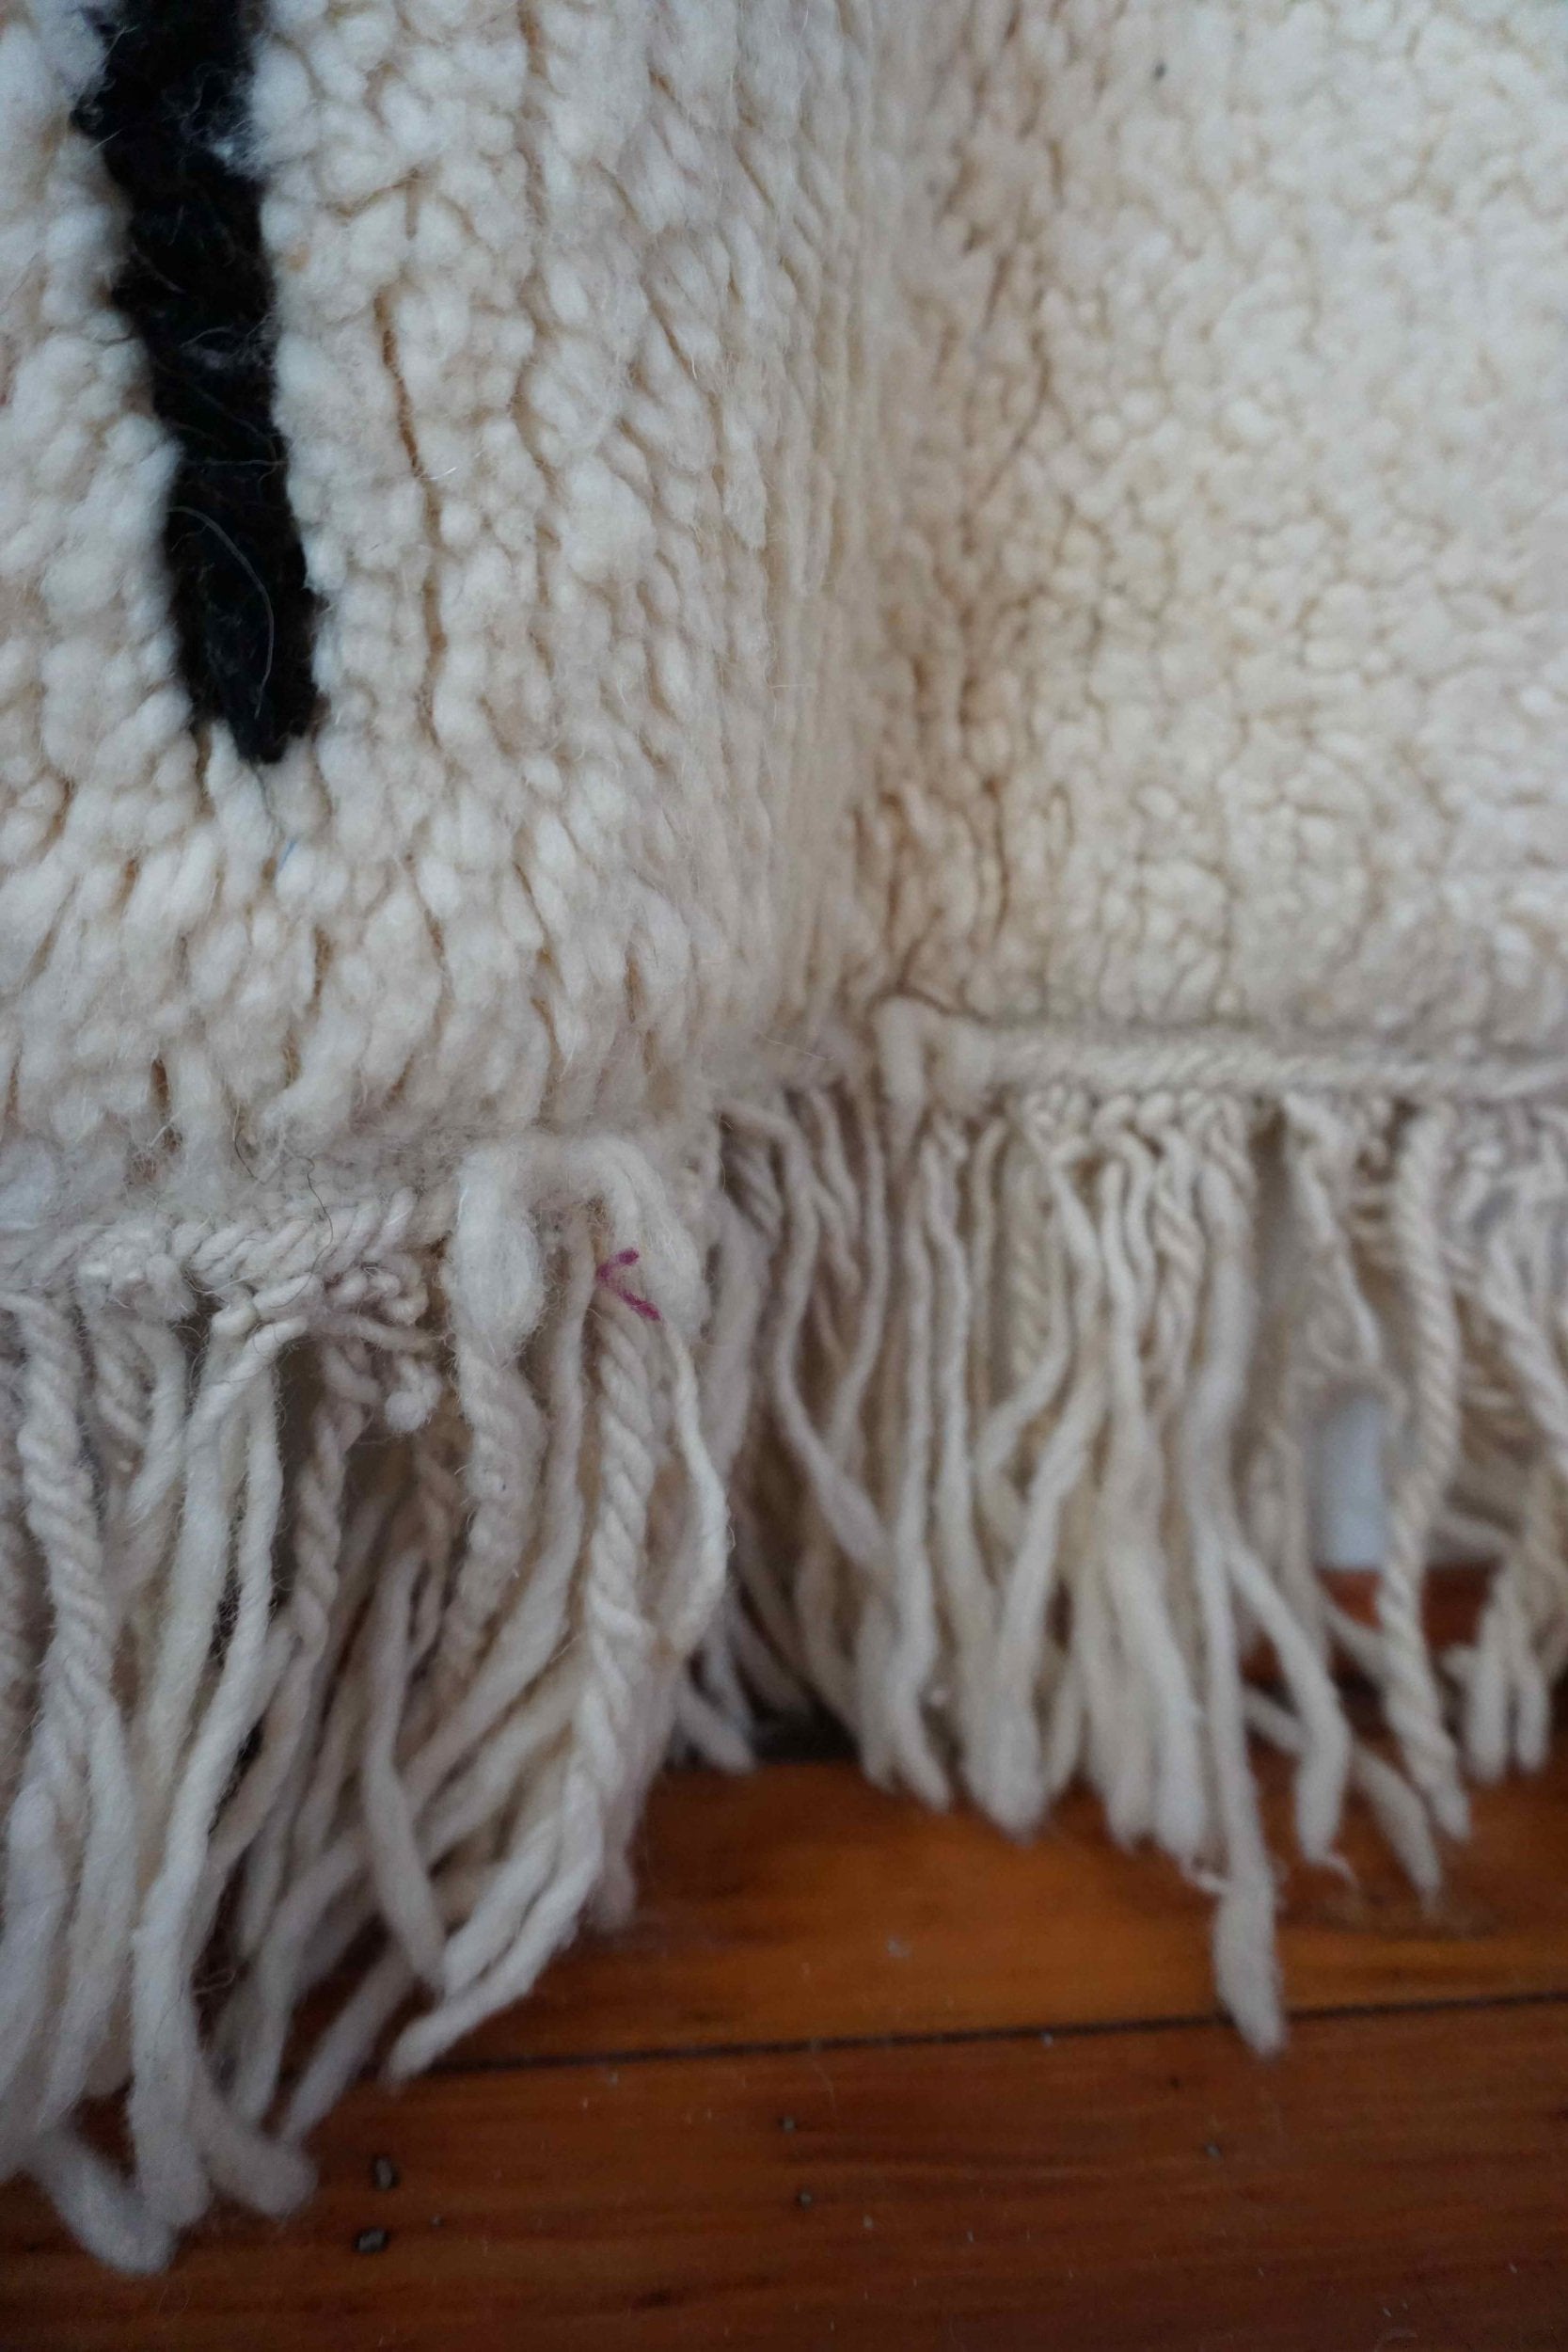 5 Reasons You Should Get a Merino Wool Rug for Your Home – BeCozi